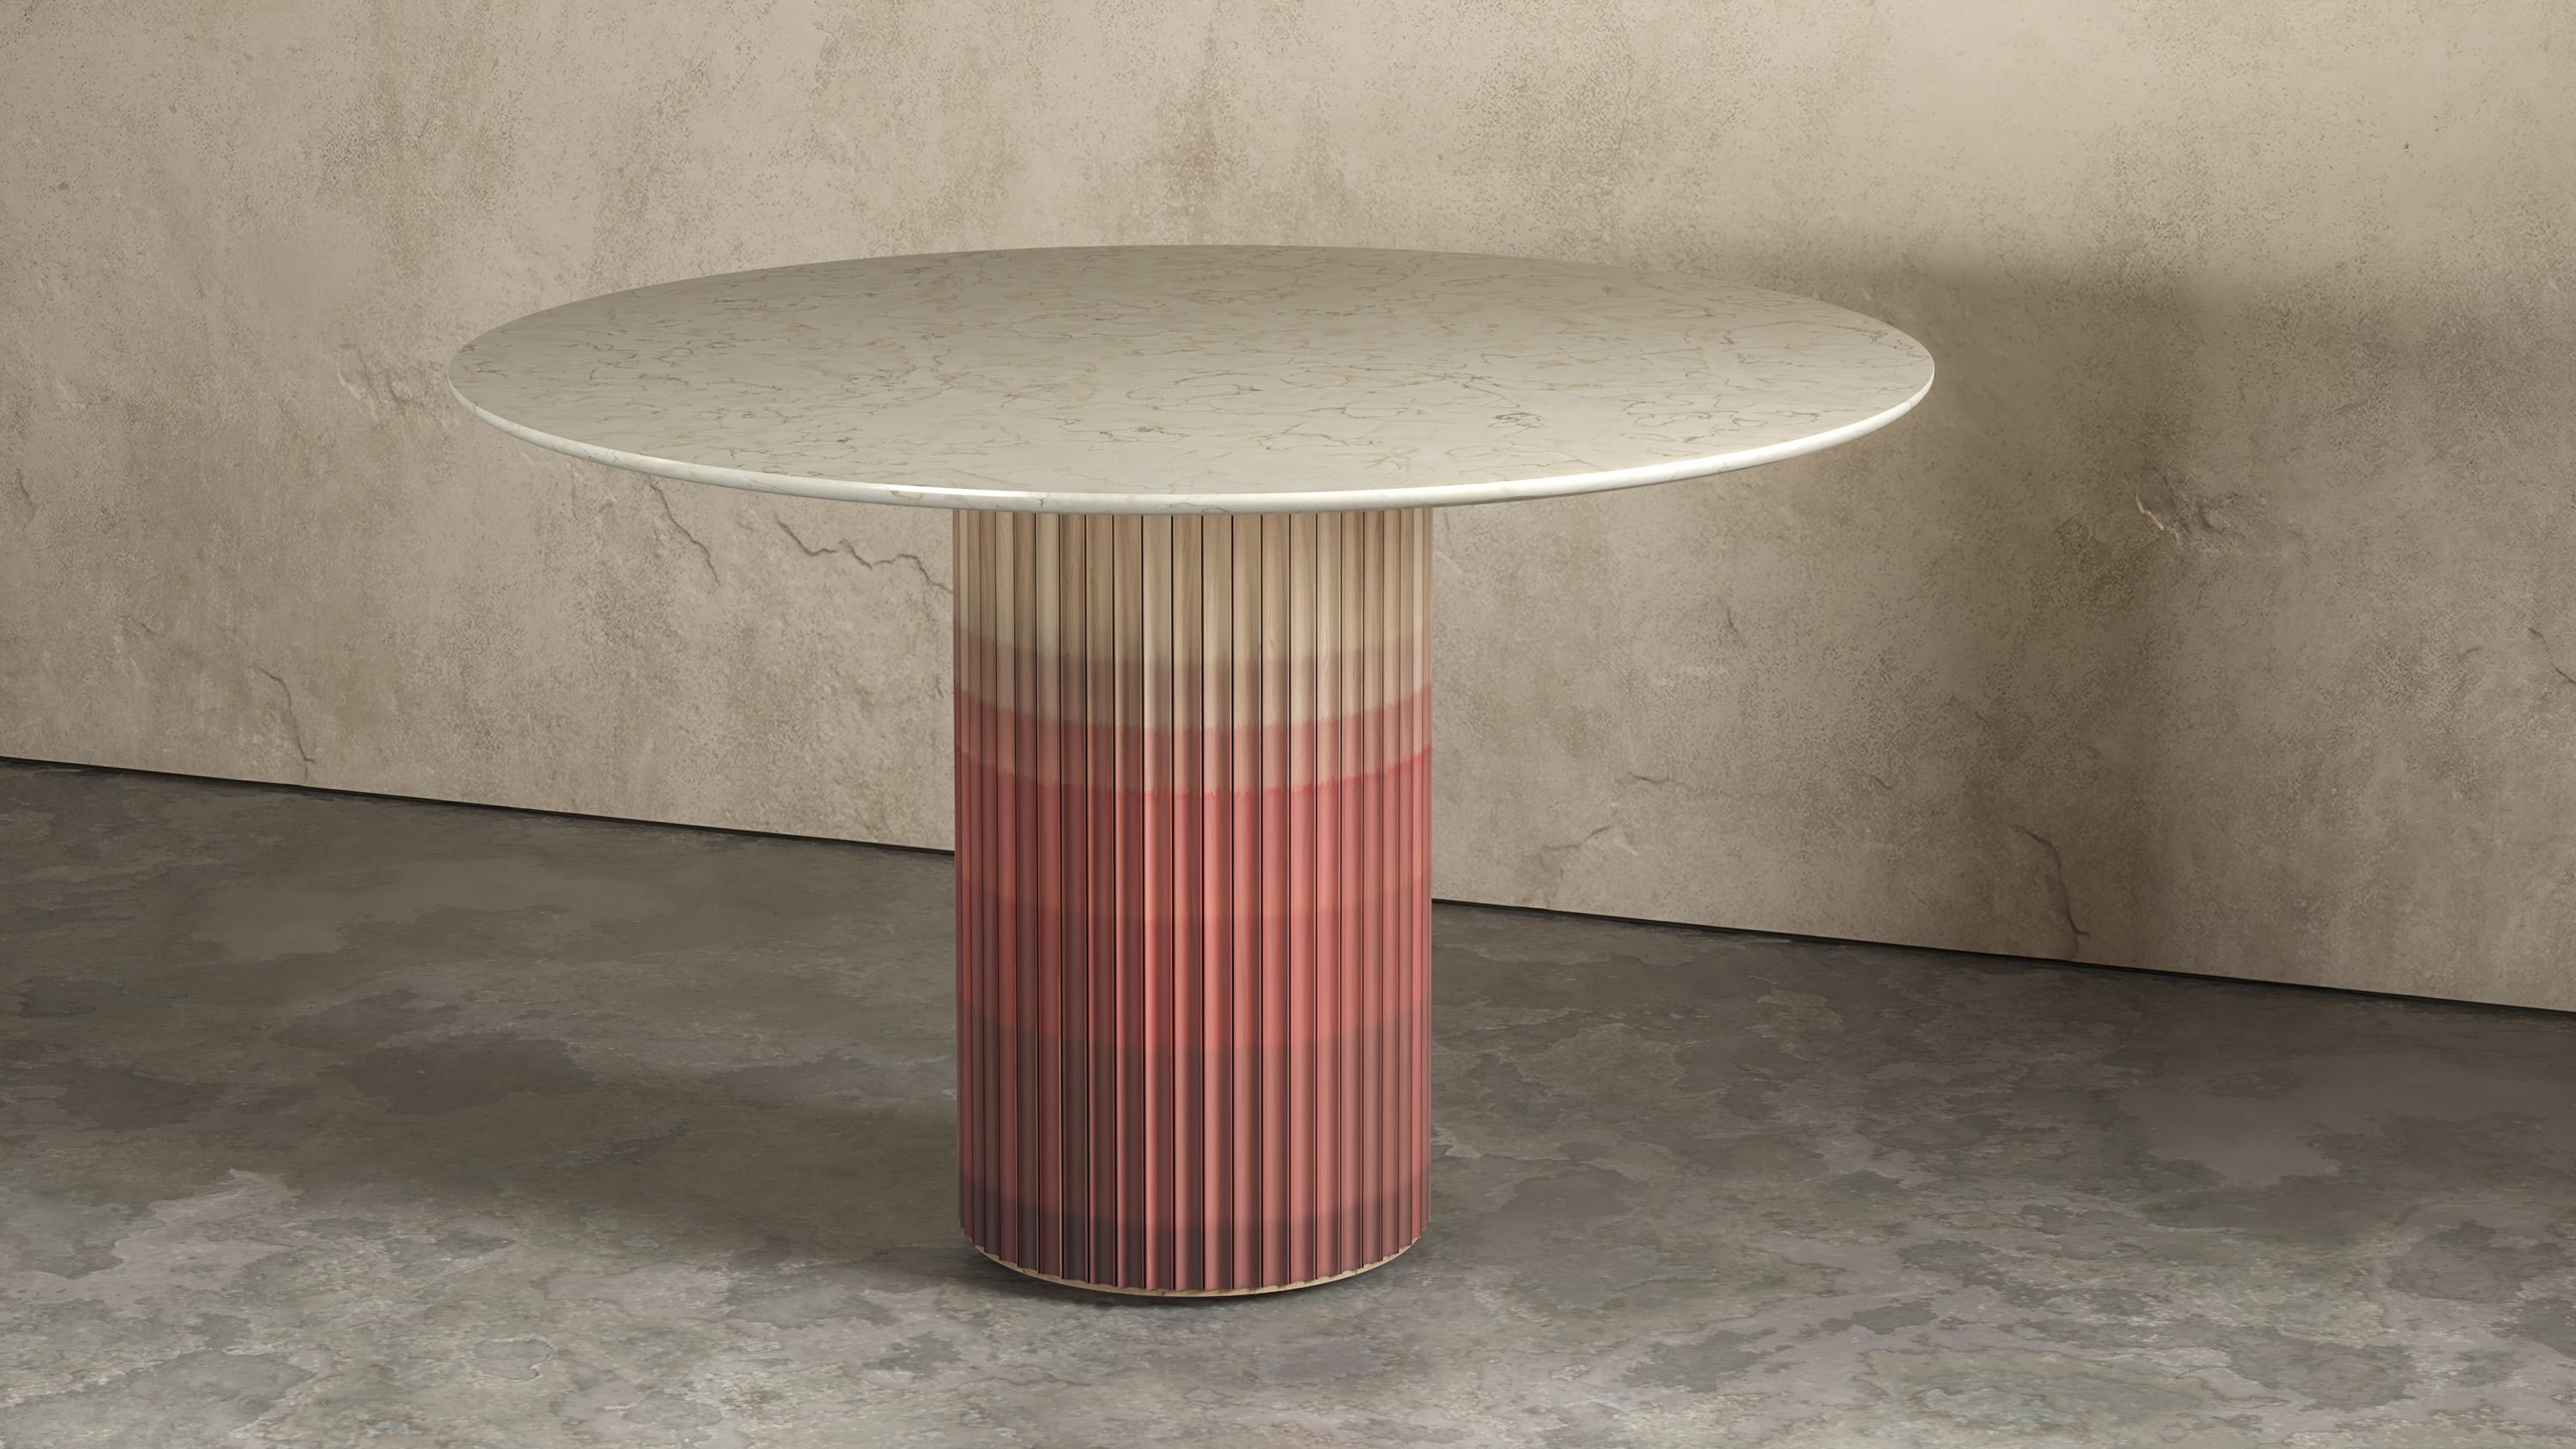 Pilar round dining table by Indo Made
One of a kind.
Dimensions: Ø122 x 76.2 cm 
Materials: Maple with copper red ombre finish, White Carrara marble top.

Also available in other materials and finishes.
Each piece is carefully handcrafted by